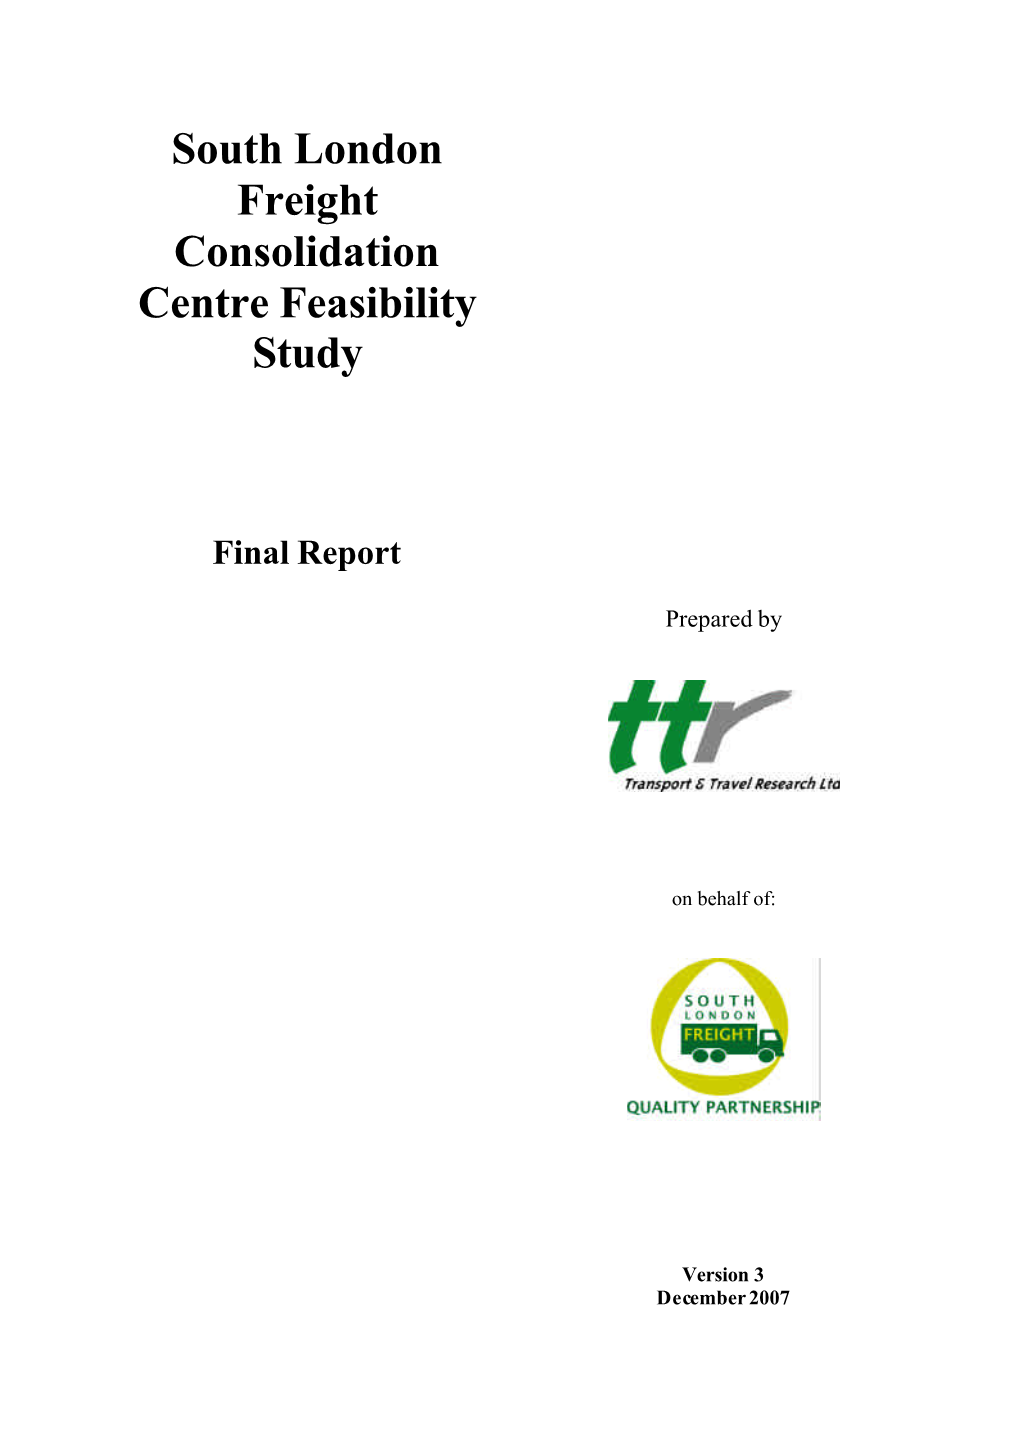 South London Freight Consolidation Centre Feasibility Study